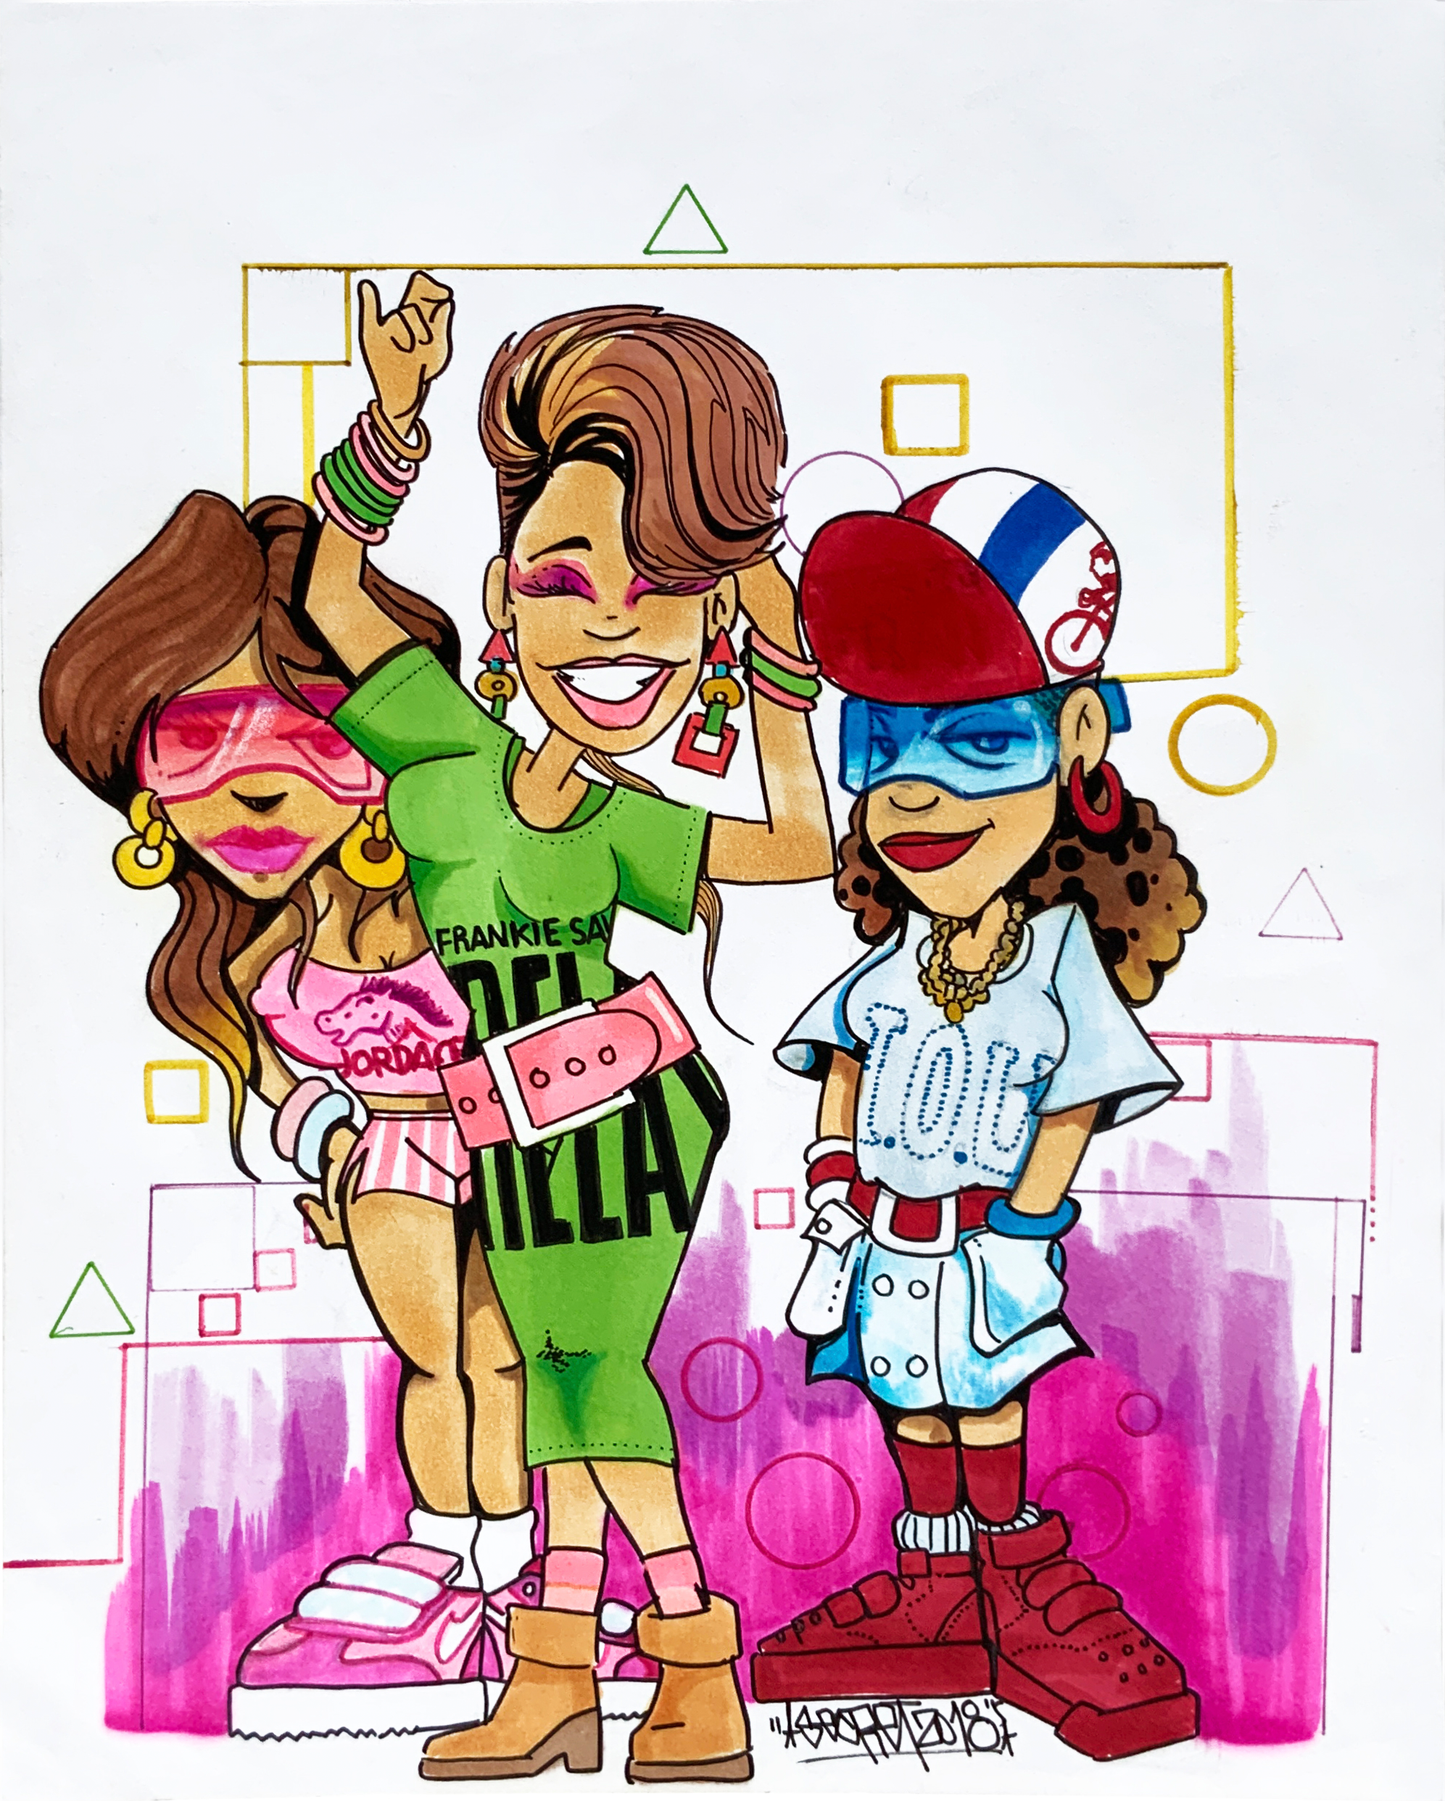 "Fly Ladies of The 80's" - 9 x 11 inches, by Chillski - 2018 - Marker and Ink on Paper